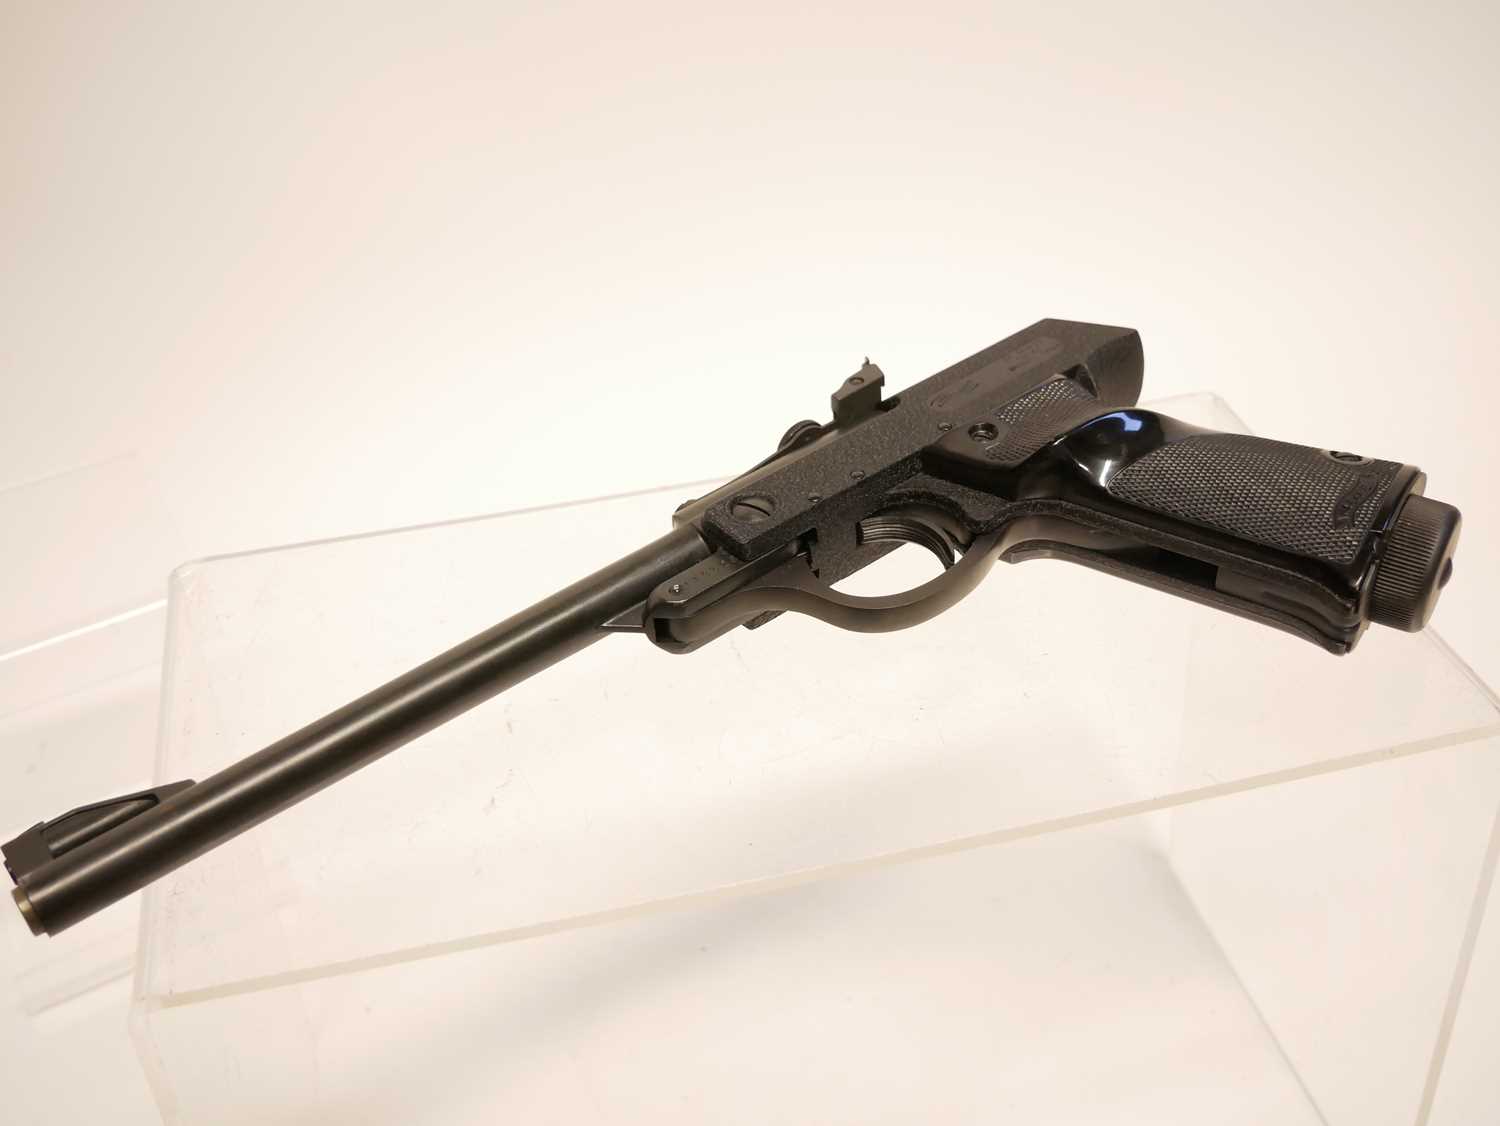 Boxed Walther .177 Model LP.53 air pistol (Luftpistole), 9.5inch barrel, serial number 118326, - Image 8 of 12